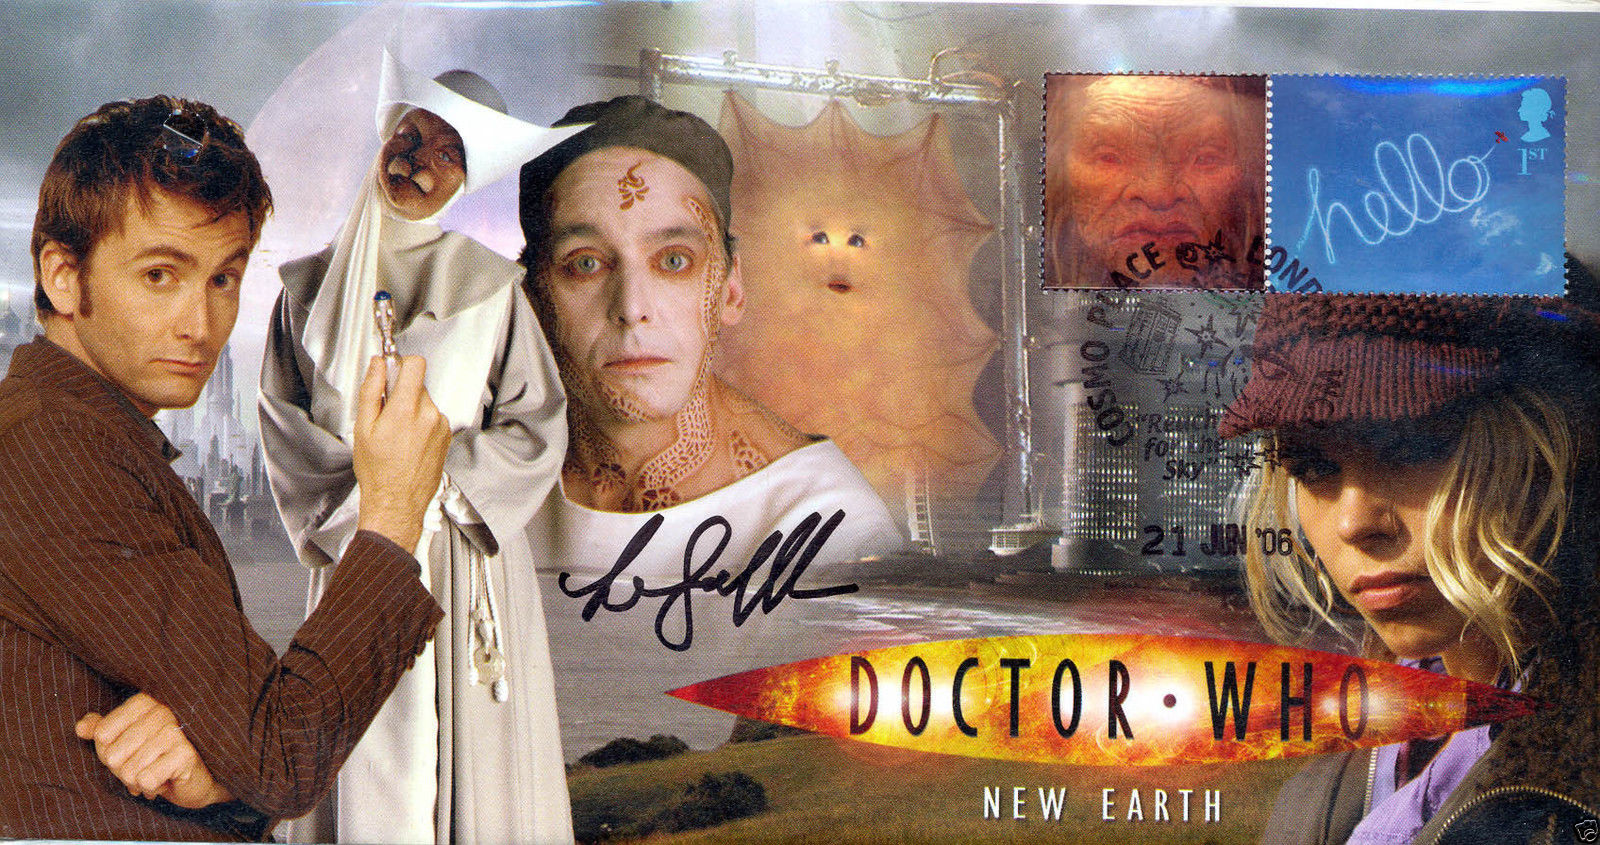 Doctor Who 2006 Series 2 Episode 1 New Earth Collectible Stamp Cover Signed by SEAN GALLAGHER